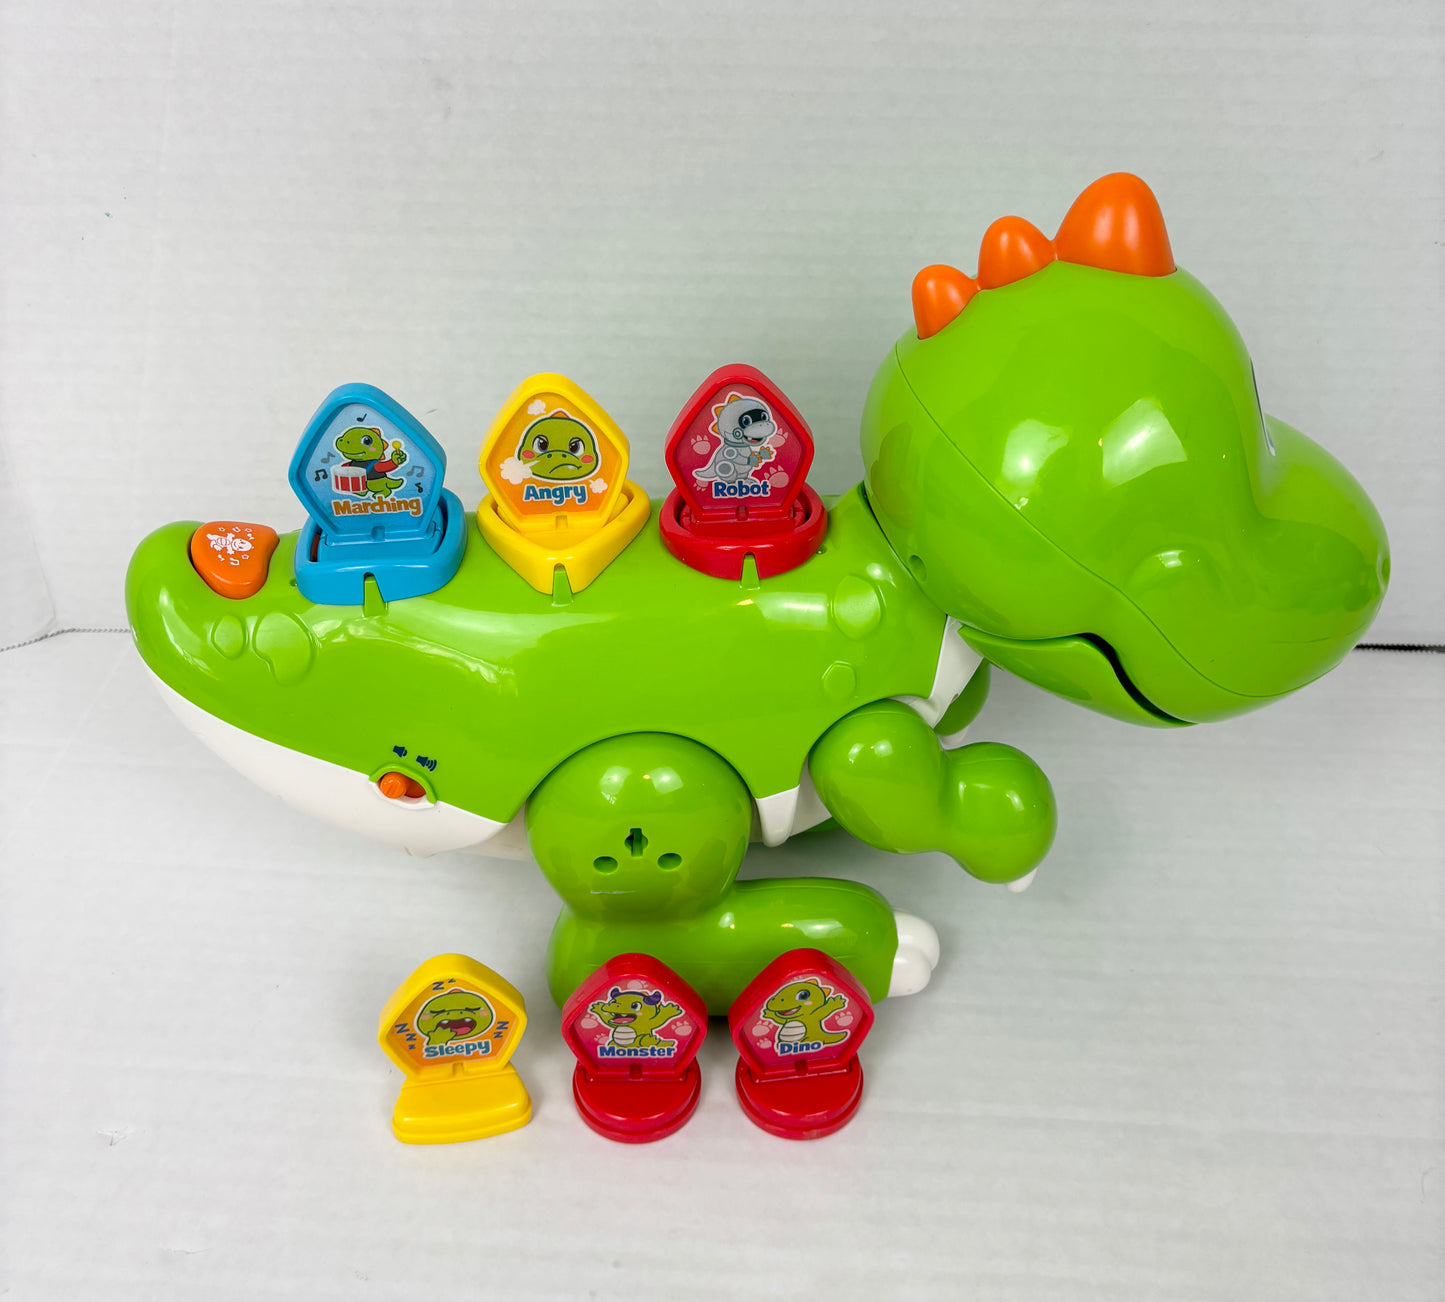 VTech Mix and Match-a-Saurus, Dinosaur Learning Toy